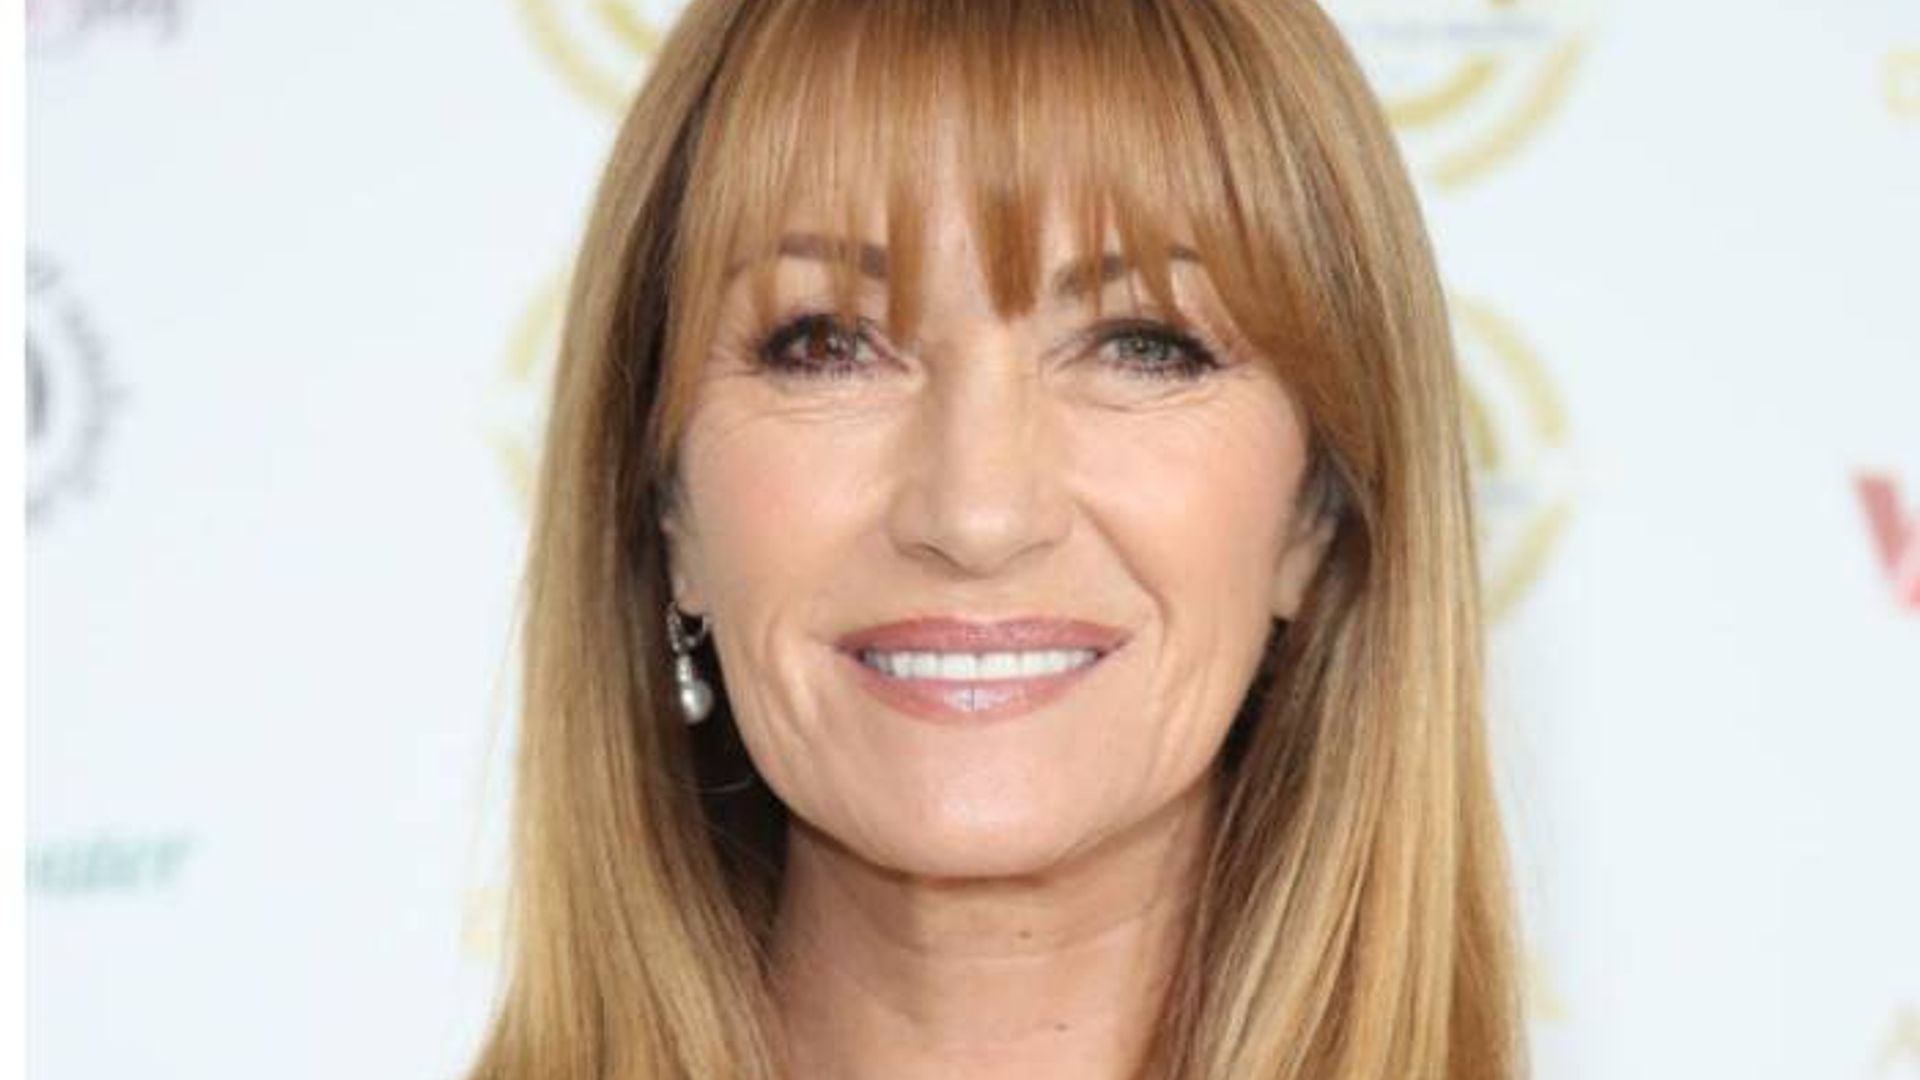 Jane Seymour leaves fans in disbelief with exceptionally rare photo alongside her 'miracle' twin sons